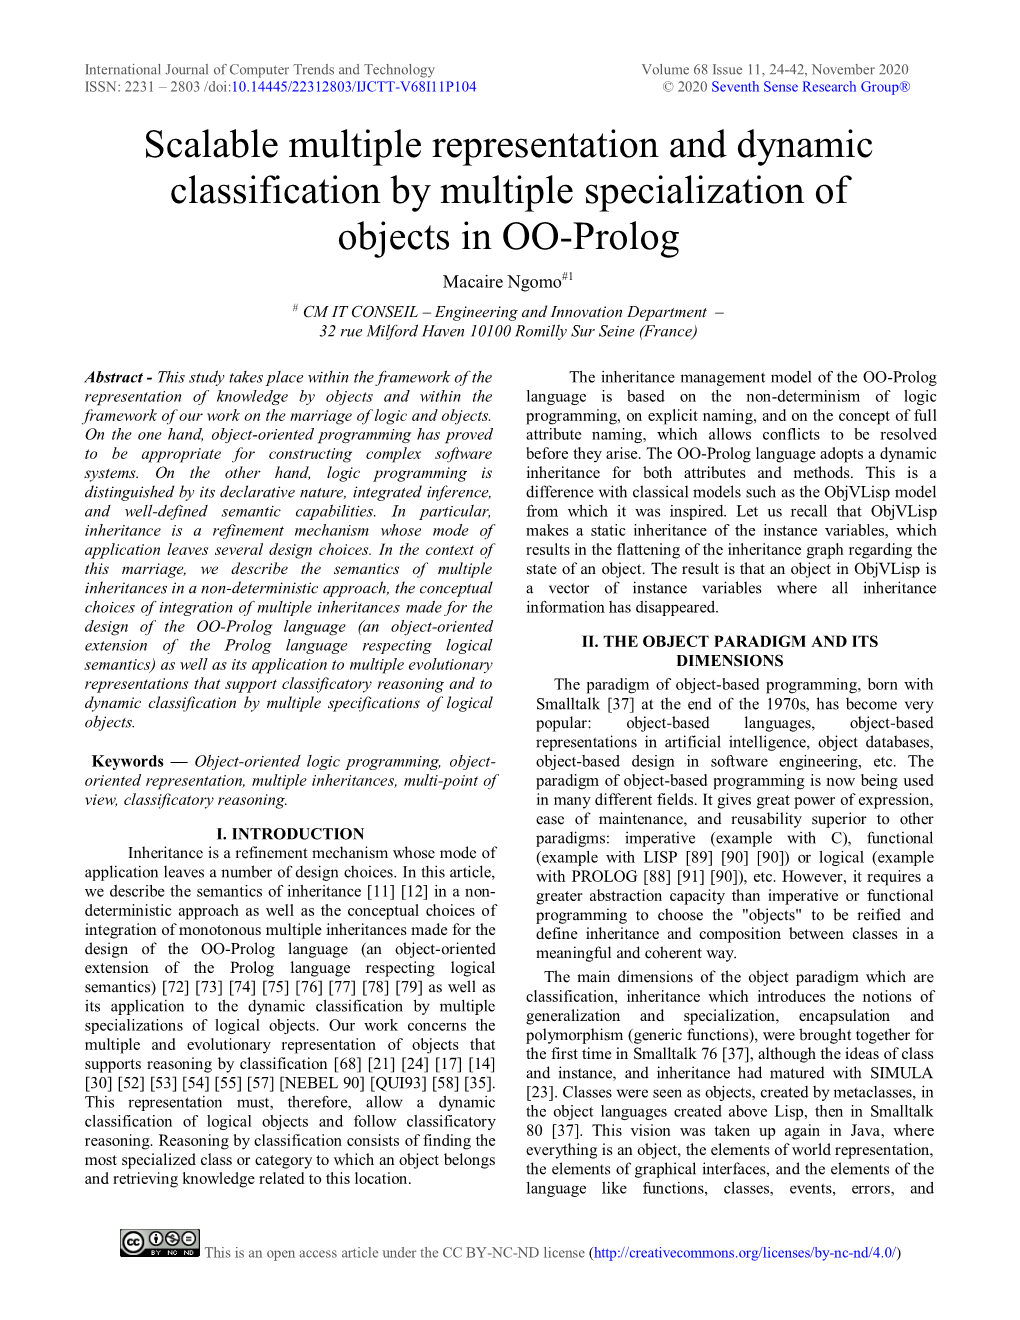 Scalable Multiple Representation and Dynamic Classification by Multiple Specialization of Objects in OO-Prolog